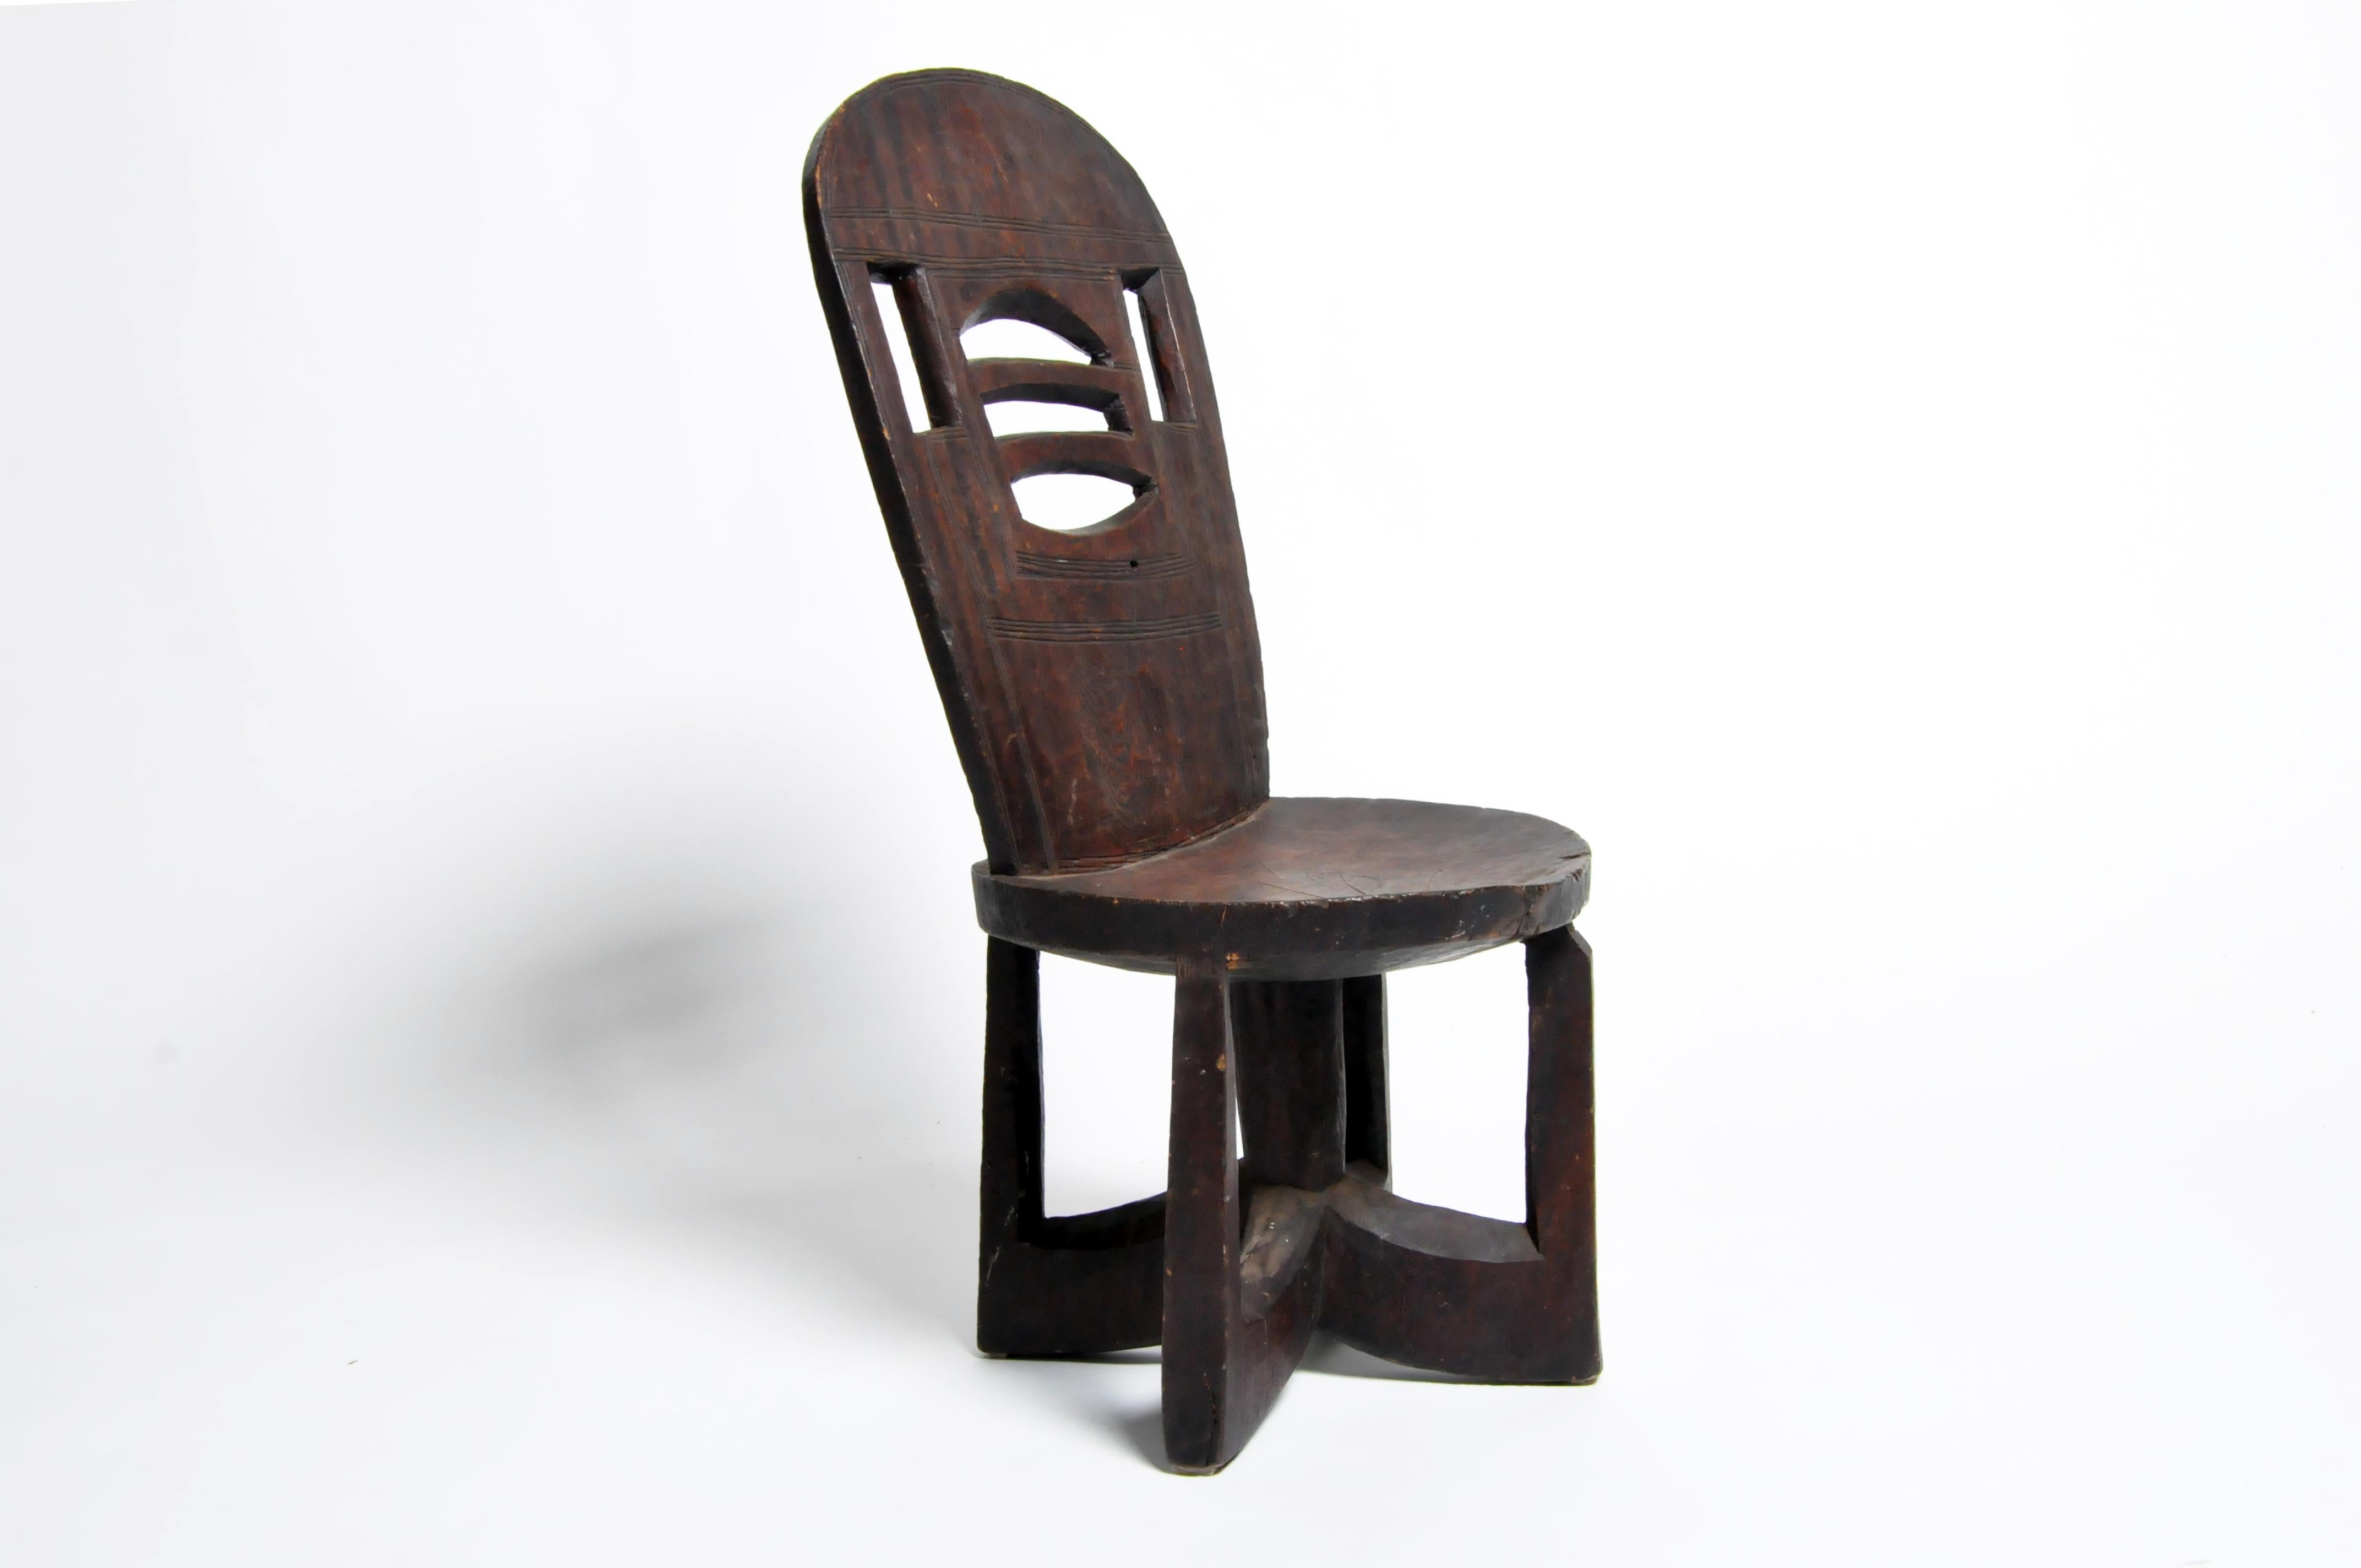 Ethiopian tribal chair; hand-carved mahogany, made from a single piece of wood, circa 20th century.